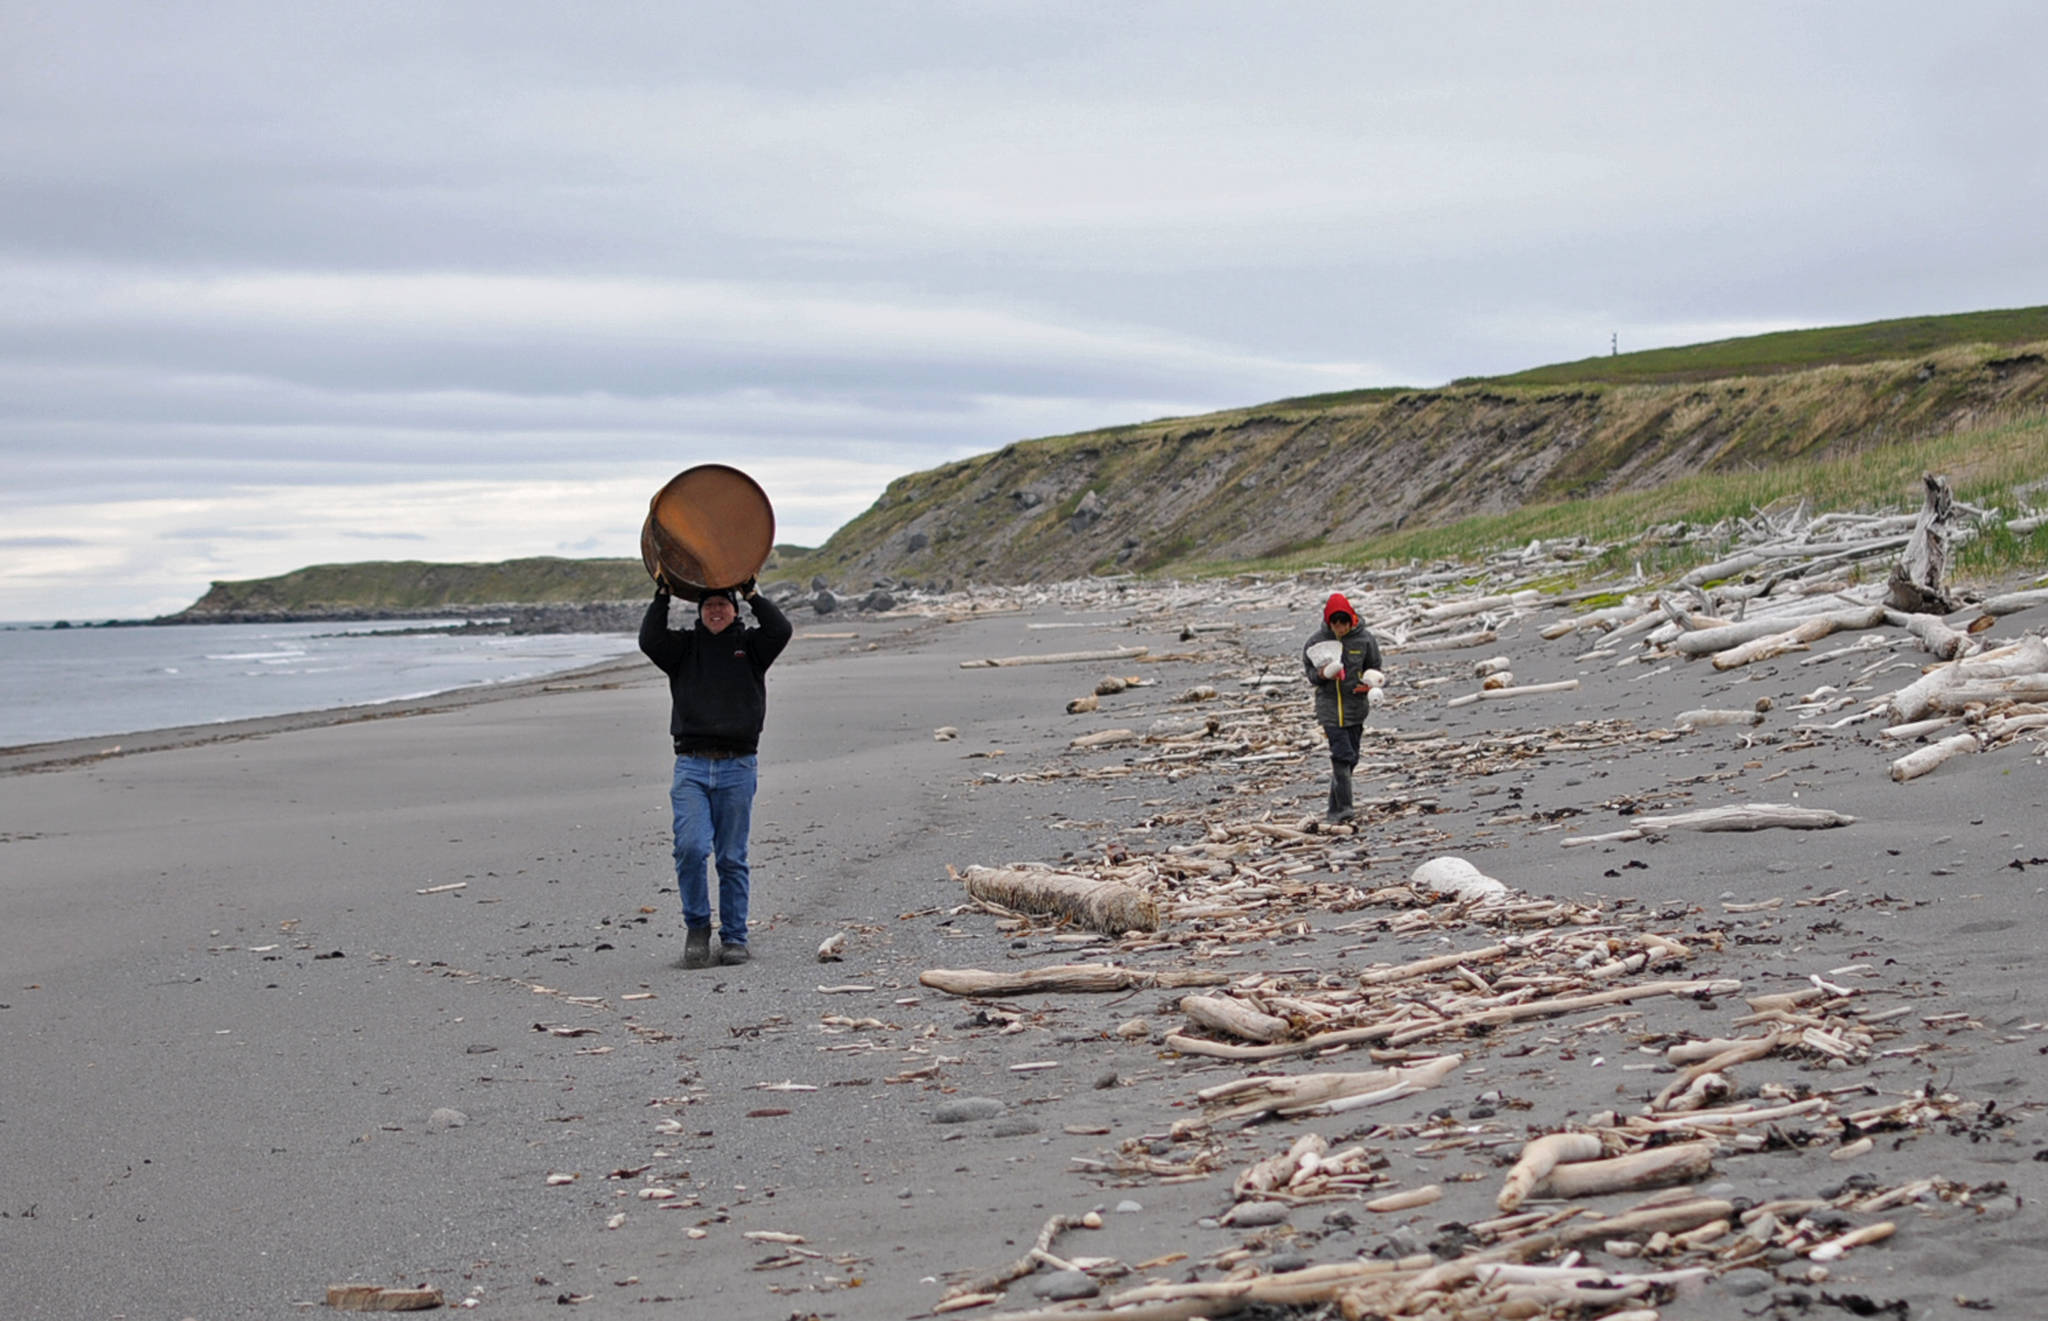 Homer Mayor Bryan Zak (left), who also serves on the board of directors of the Center for Alaskan Coastal Studies, carries back a rusted barrel along the beach with Connections student Gautama Iwamura (right) on Sunday, June 3, 2017 on Augustine Island, Alaska. The two were participants in a trip organized by the Center for Alaskan Coastal Studies to clean up the beaches of the remote Cook Inlet island, composed mostly of an active volcanot and its surrounding debris. (Elizabeth Earl/Peninsula Clarion)  Homer Mayor Bryan Zak (left), who also serves on the board of directors of the Center for Alaskan Coastal Studies, carries back a rusted barrel along the beach with Connections student Gautama Iwamura (right) on Sunday on Augustine Island. The two were participants in a trip organized by the Center for Alaskan Coastal Studies to clean up the beaches of the remote Cook Inlet island, composed mostly of an active volcanot and its surrounding debris. (Elizabeth Earl/Peninsula Clarion)